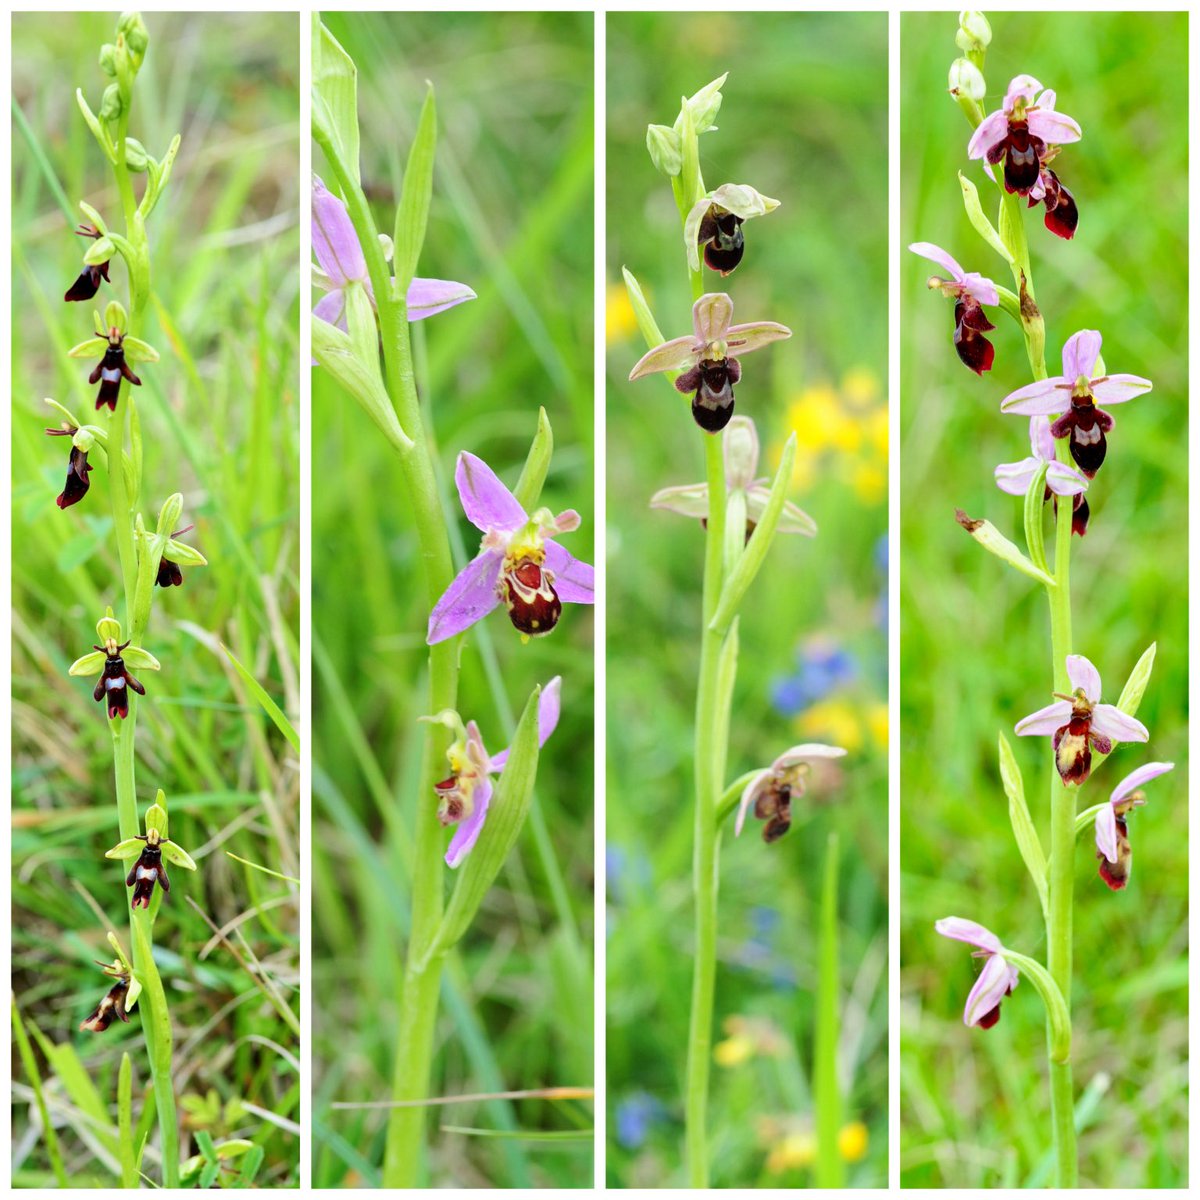 Some standout Fly x Bee orchids, amongst the numerous Fly orchids and scattered Bee orchids. Rather disturbingly someone has ‘removed’ one of the more prominent hybrids. Stroud Commons #Gloucestershire #wildflowerhour ⁦@BSBIbotany⁩ ⁦@ukorchids⁩